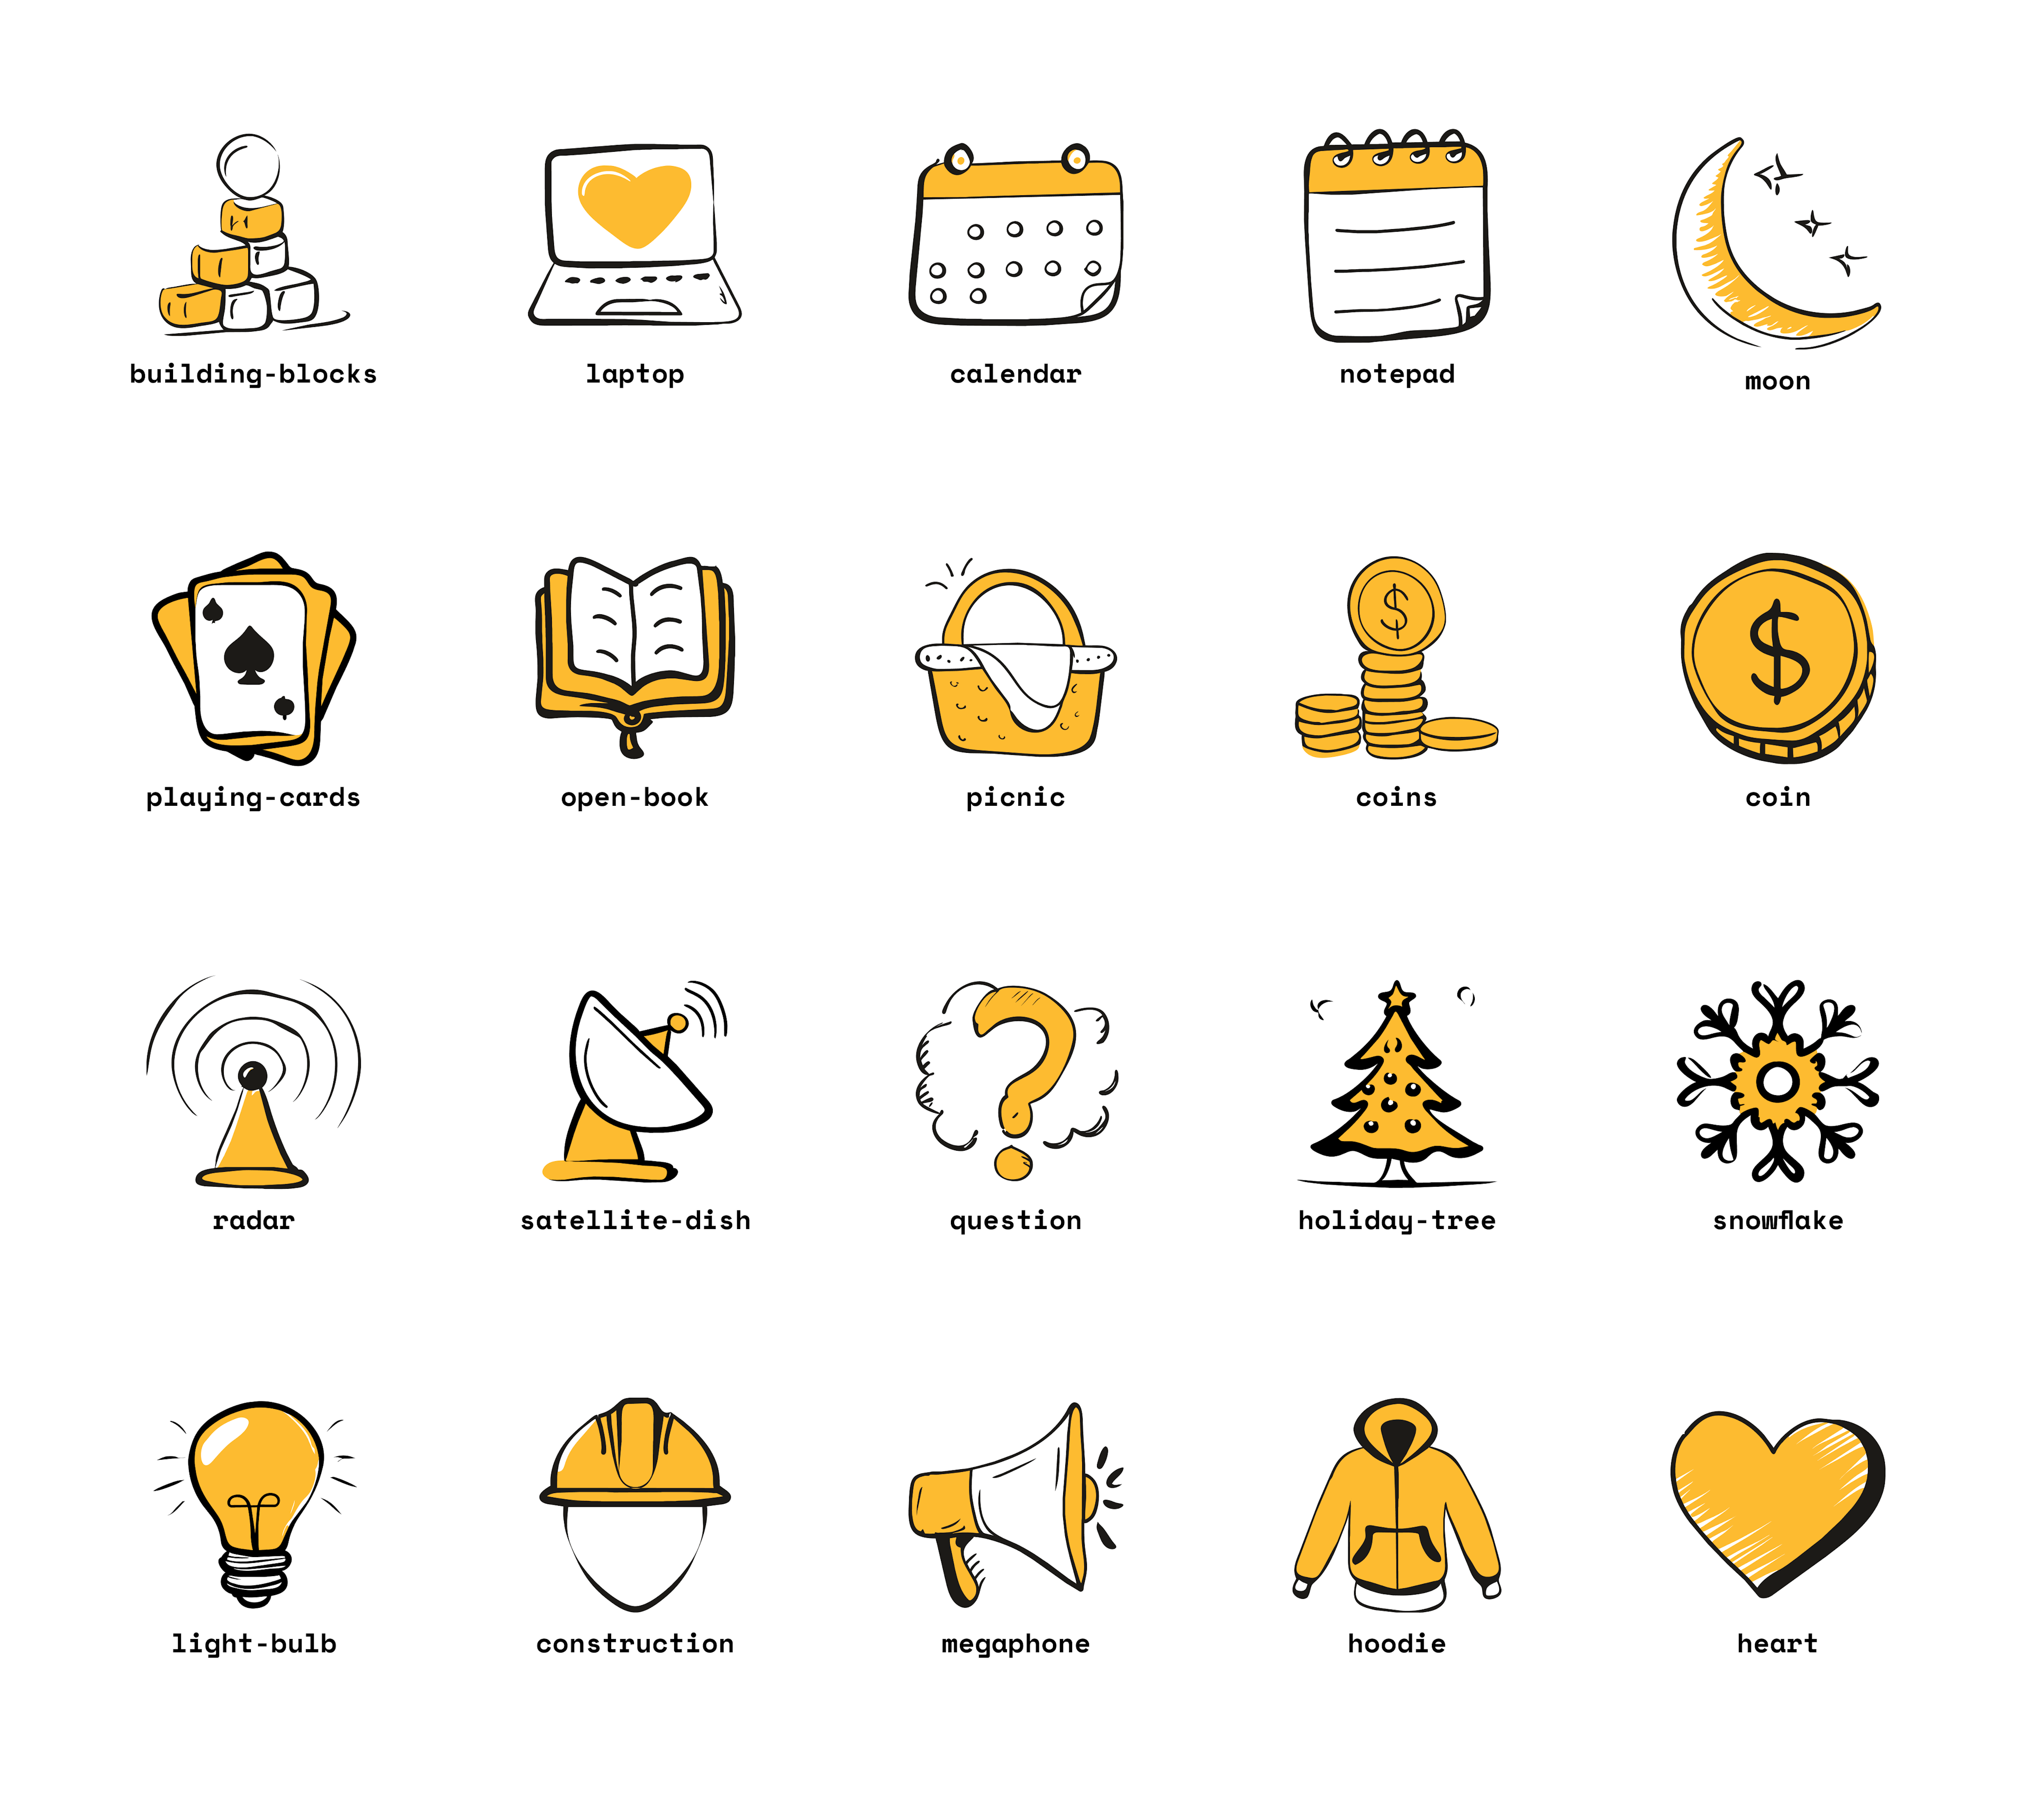 A set of AI-generated vector icons for compsigh, a computer science club at the University of San Francisco